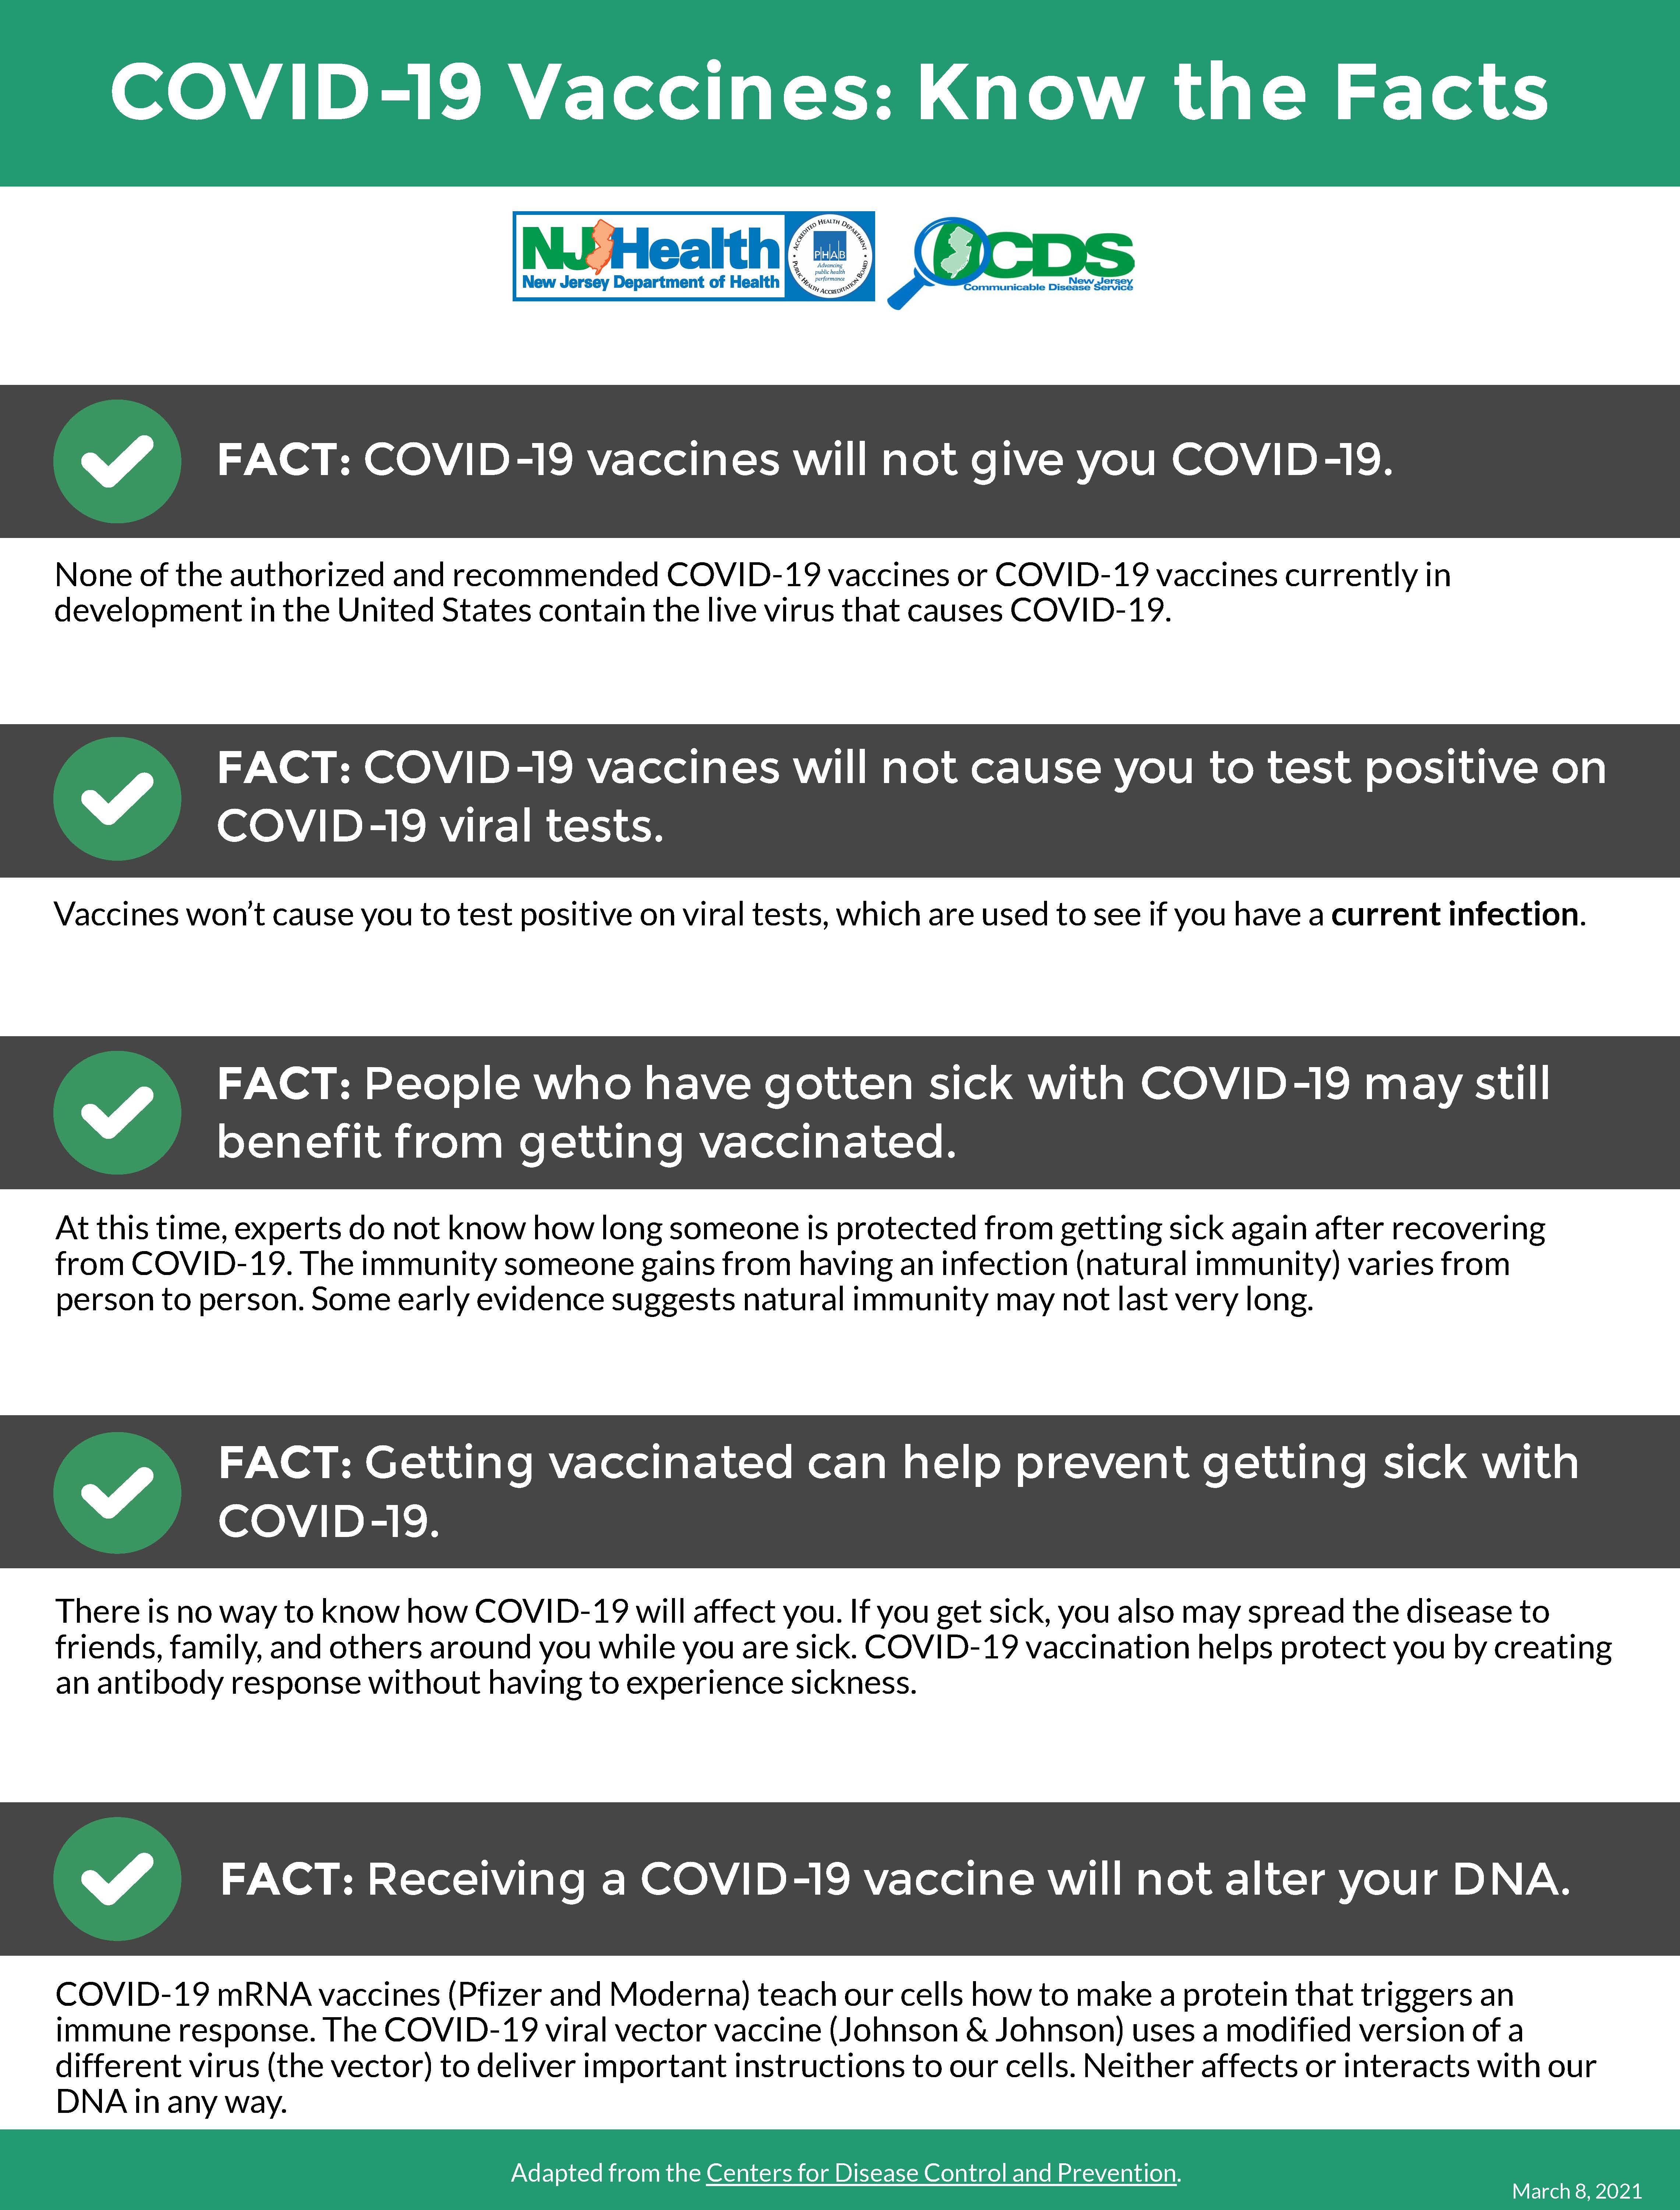 COVID-19 Vaccine Know the Facts flyer